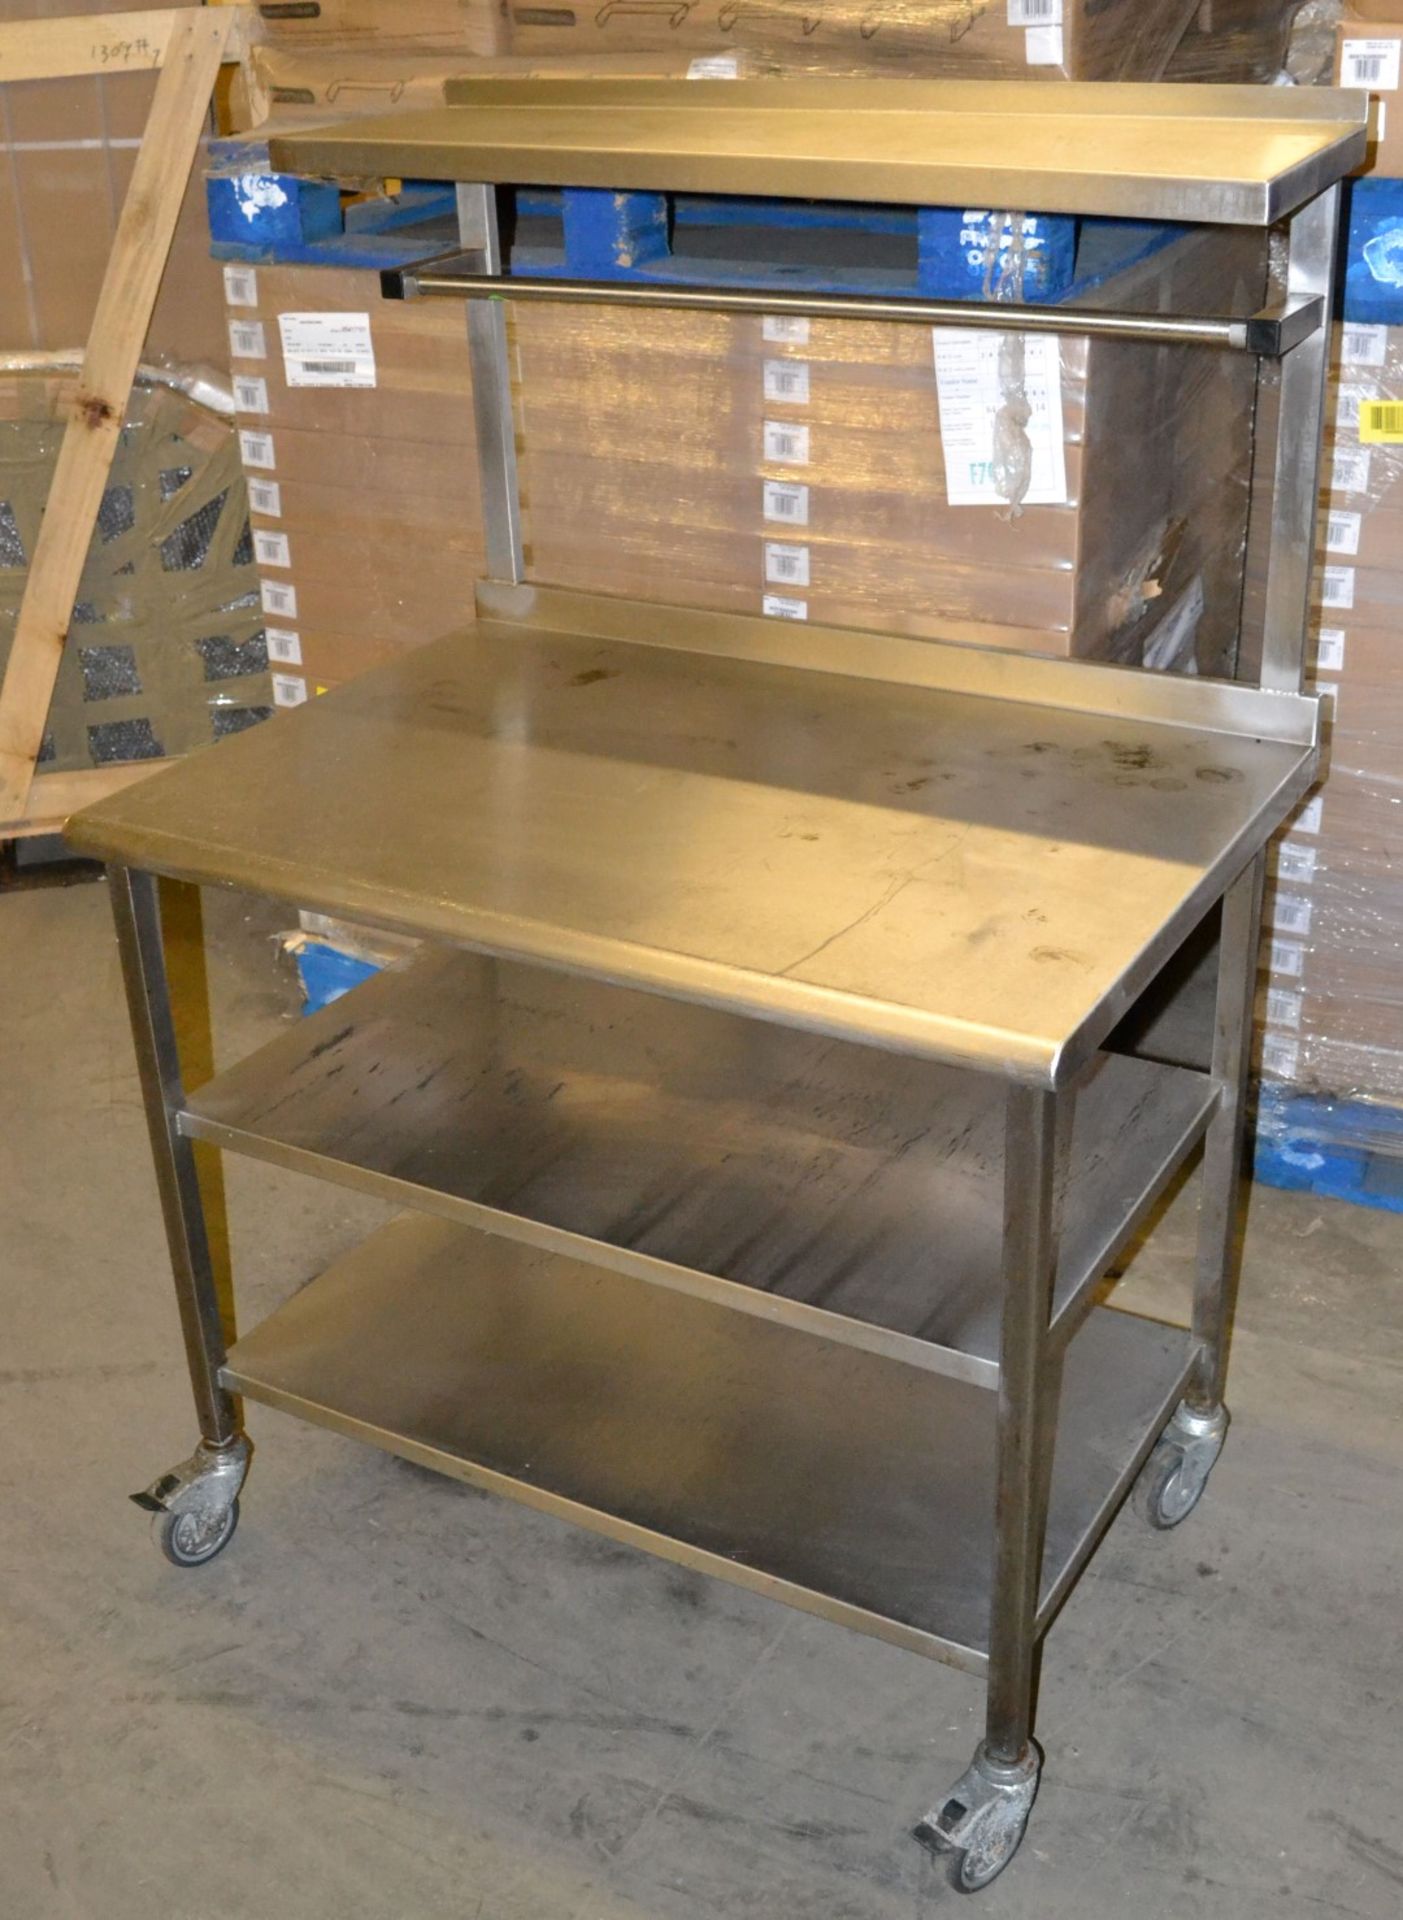 1 x Wheeled Stainless Steel Prep Table - Dimensions: 100 x 69.5 x 148cm - Ref: MC120 - CL282 - Locat - Image 7 of 11